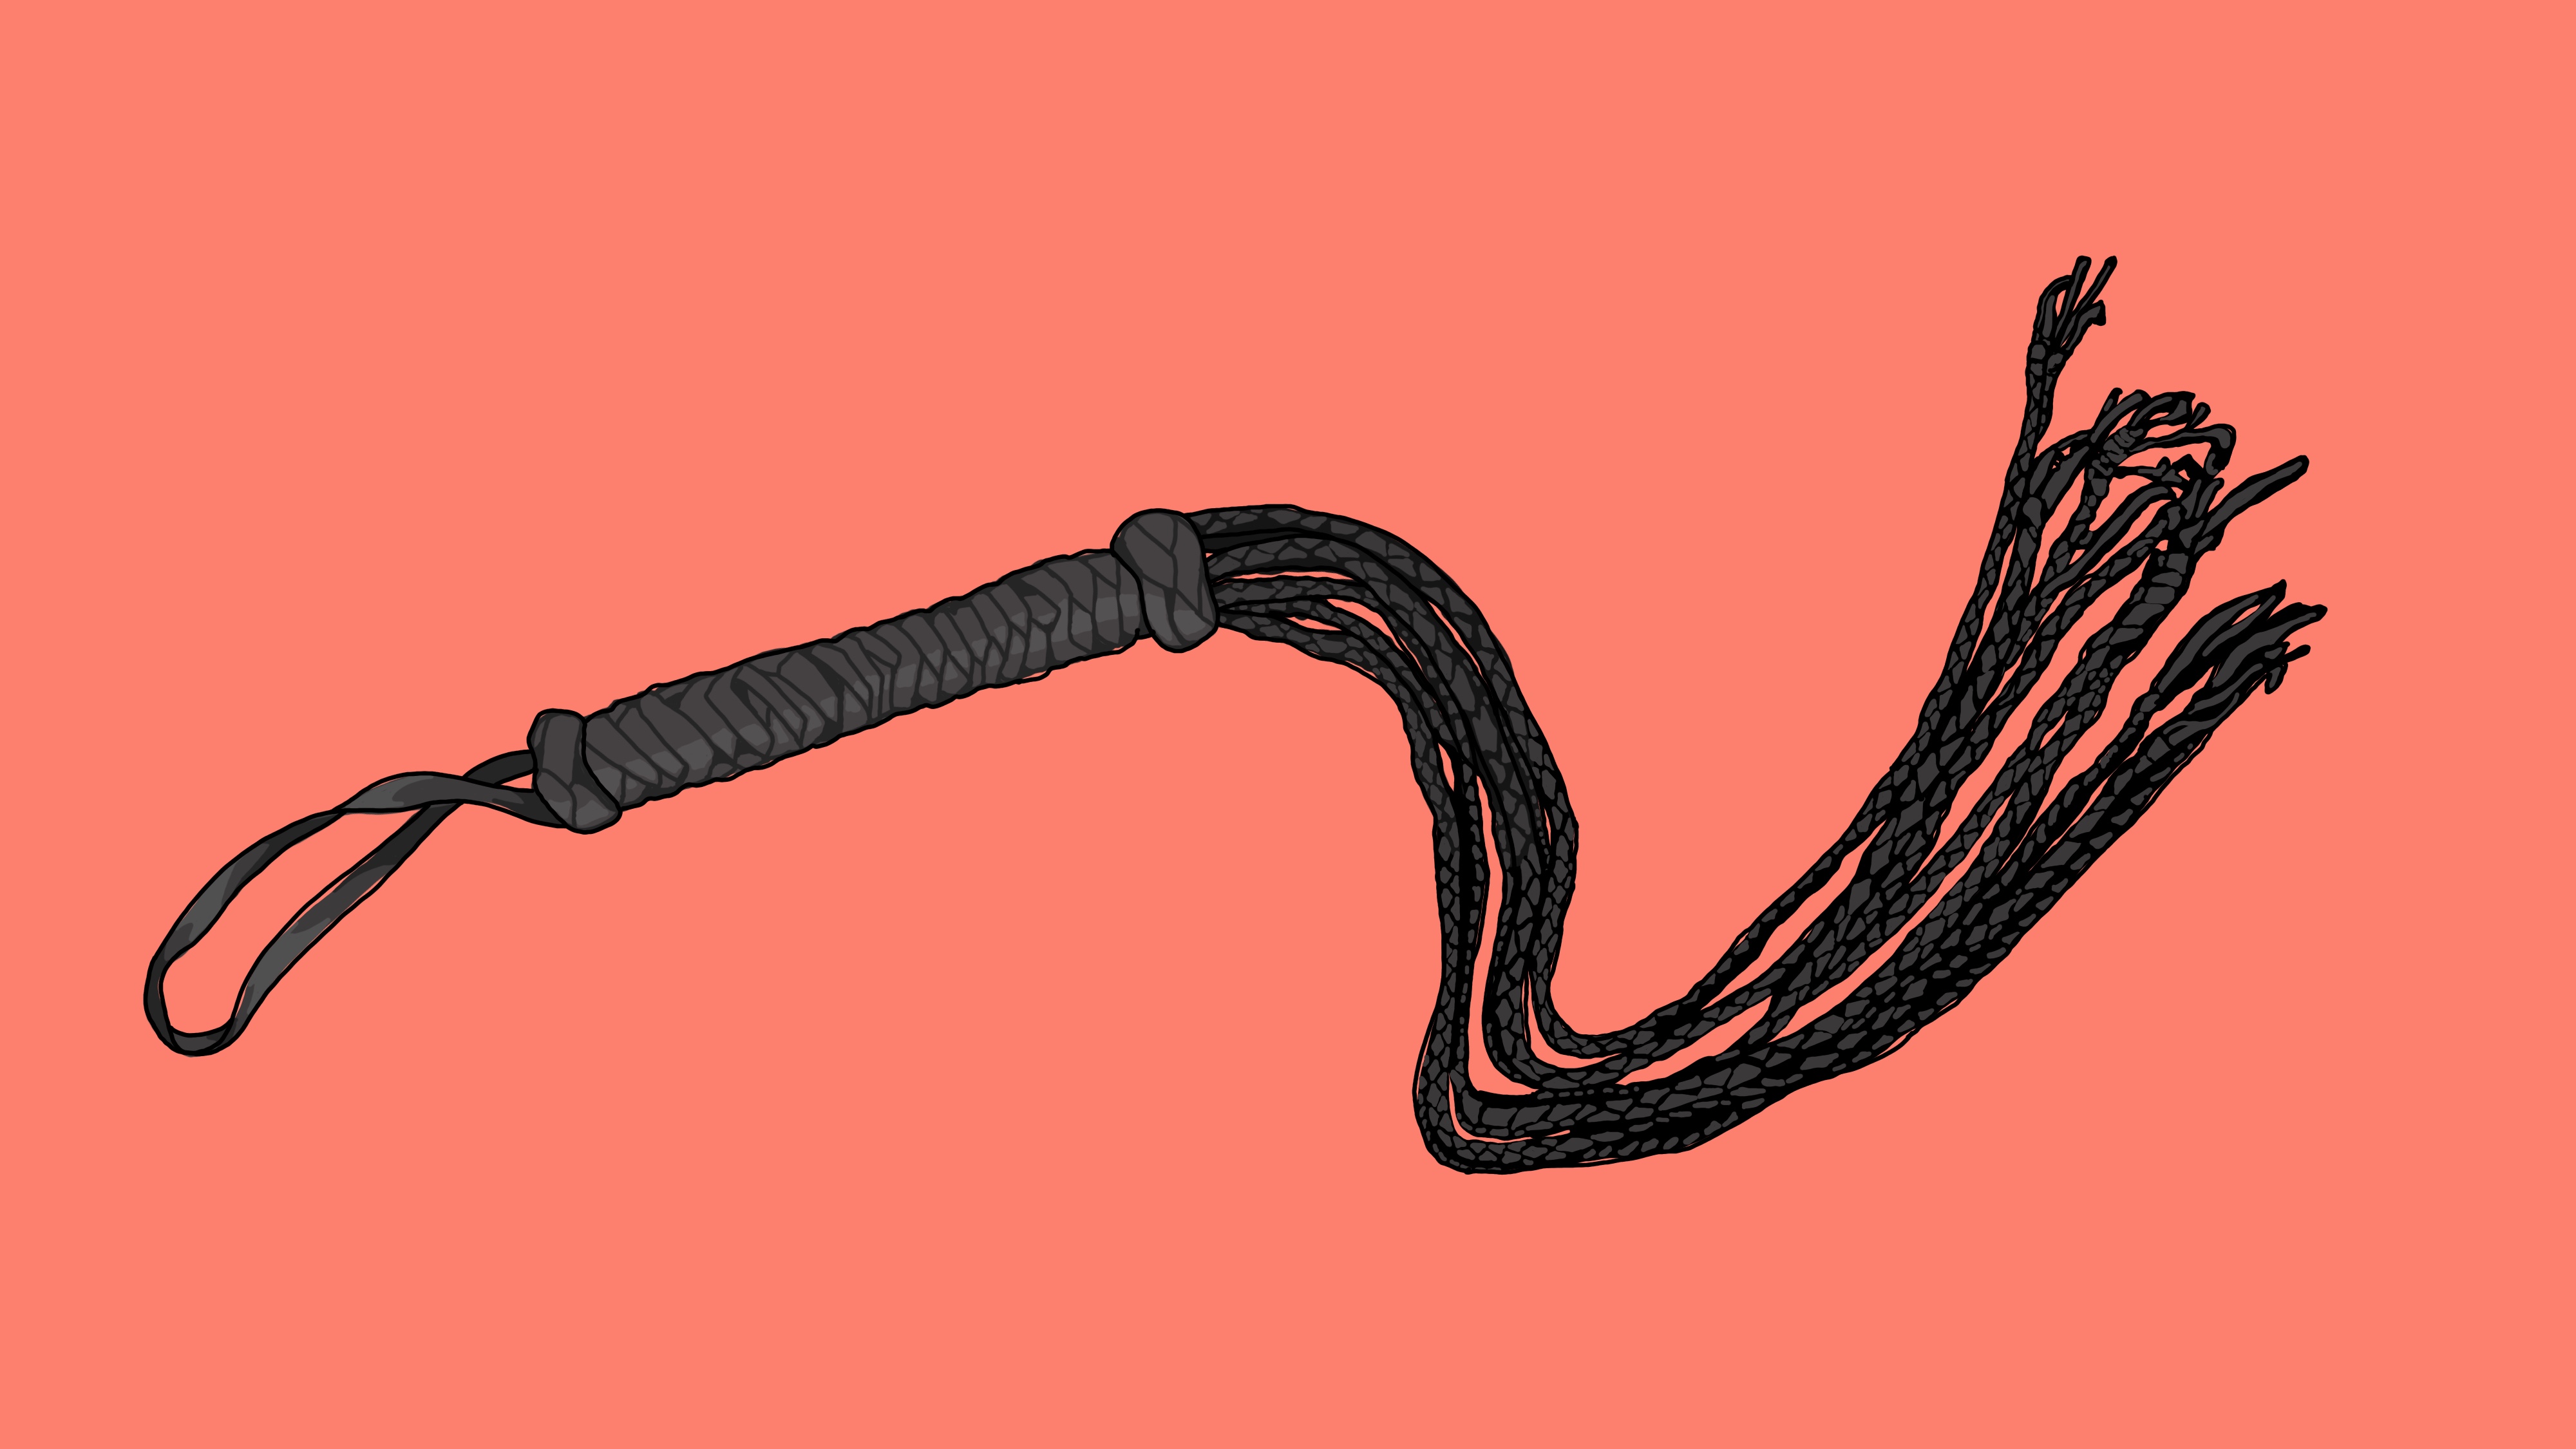 A black whip on a reddish background.